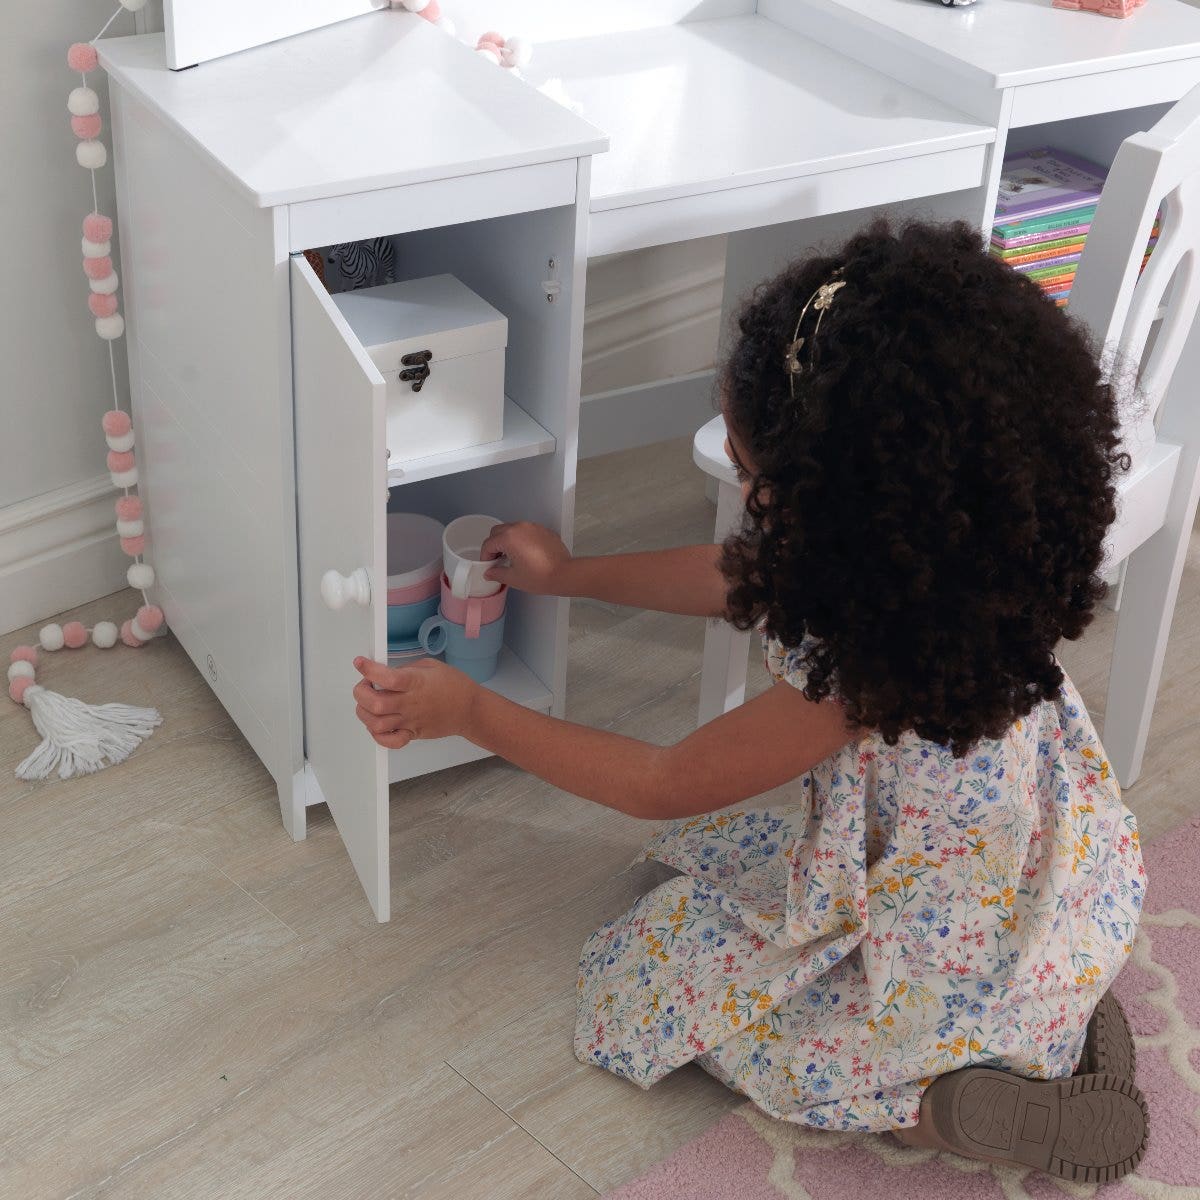 Hidden Storage. For more privacy, use the door with shelving behind it for jewelry, toys or notes.